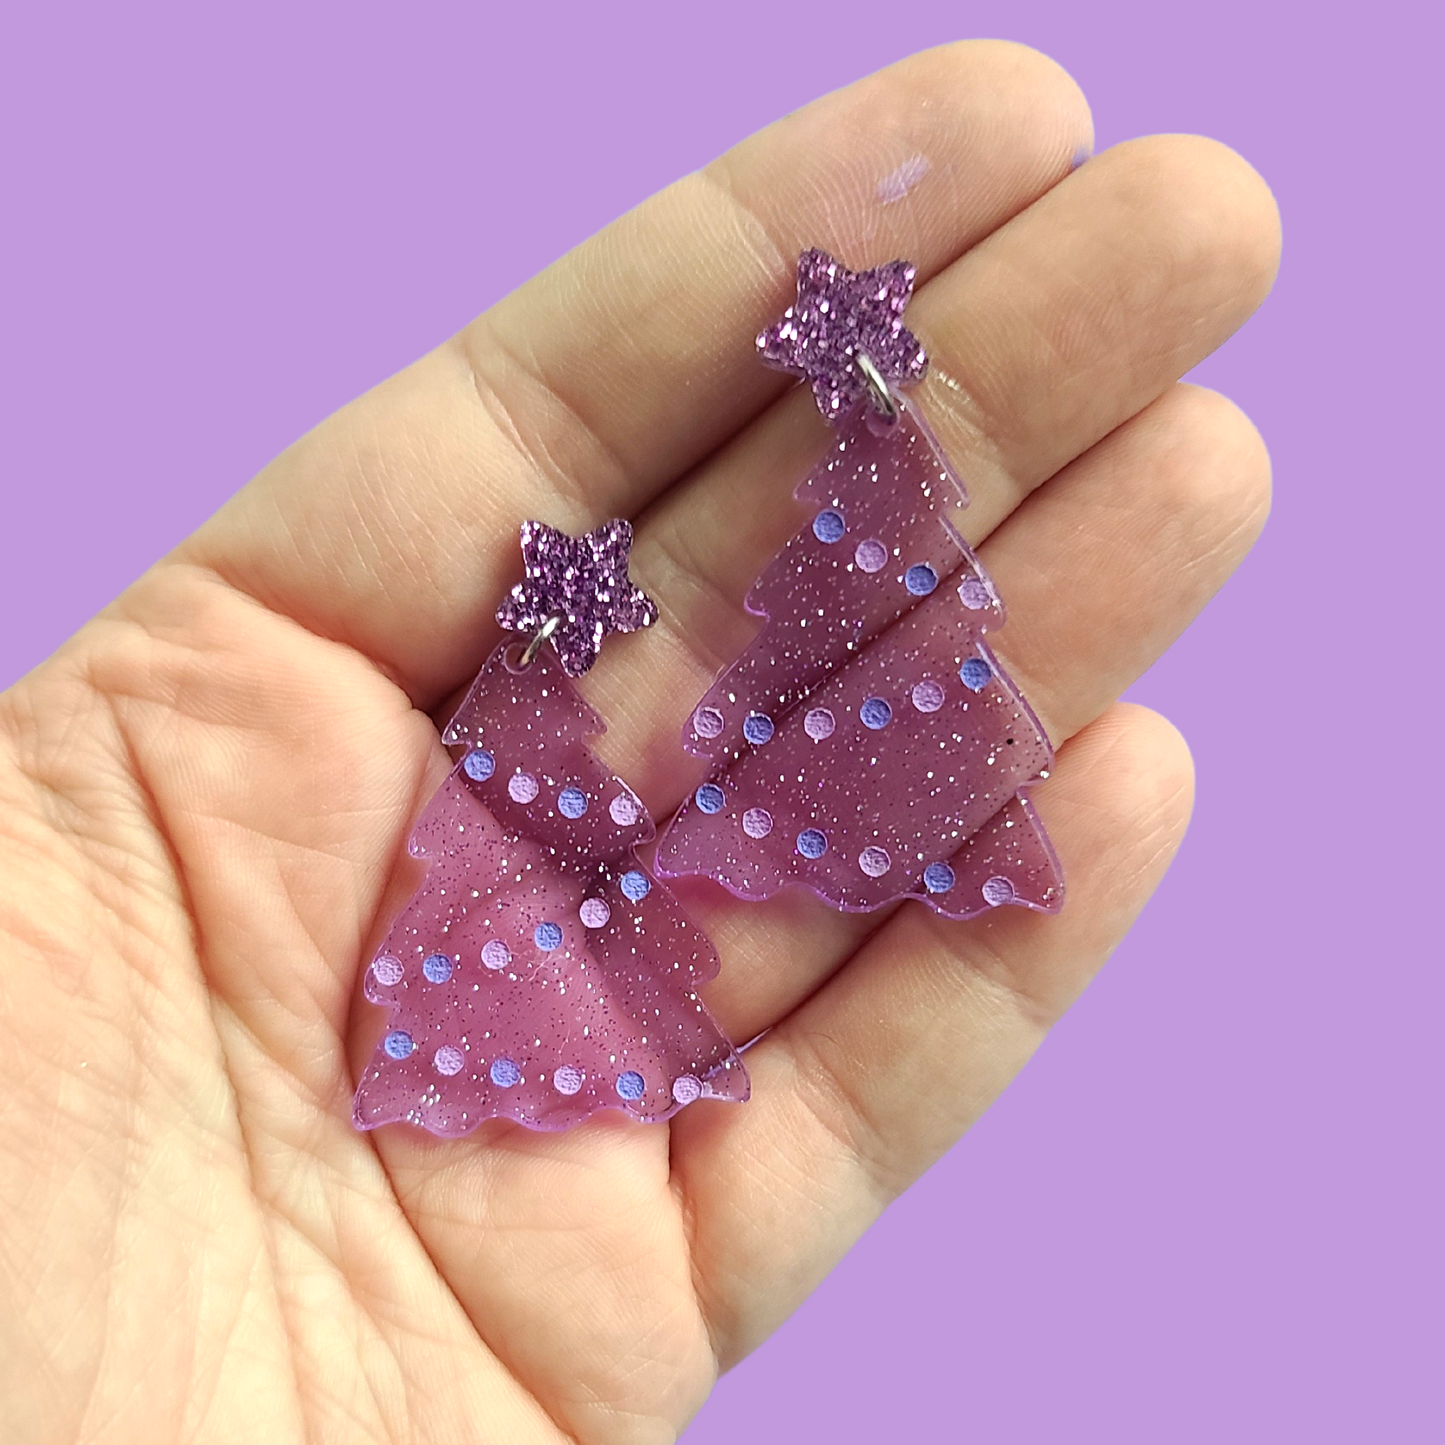 Purple Jelly Trees with Glitter Studs - Christmas